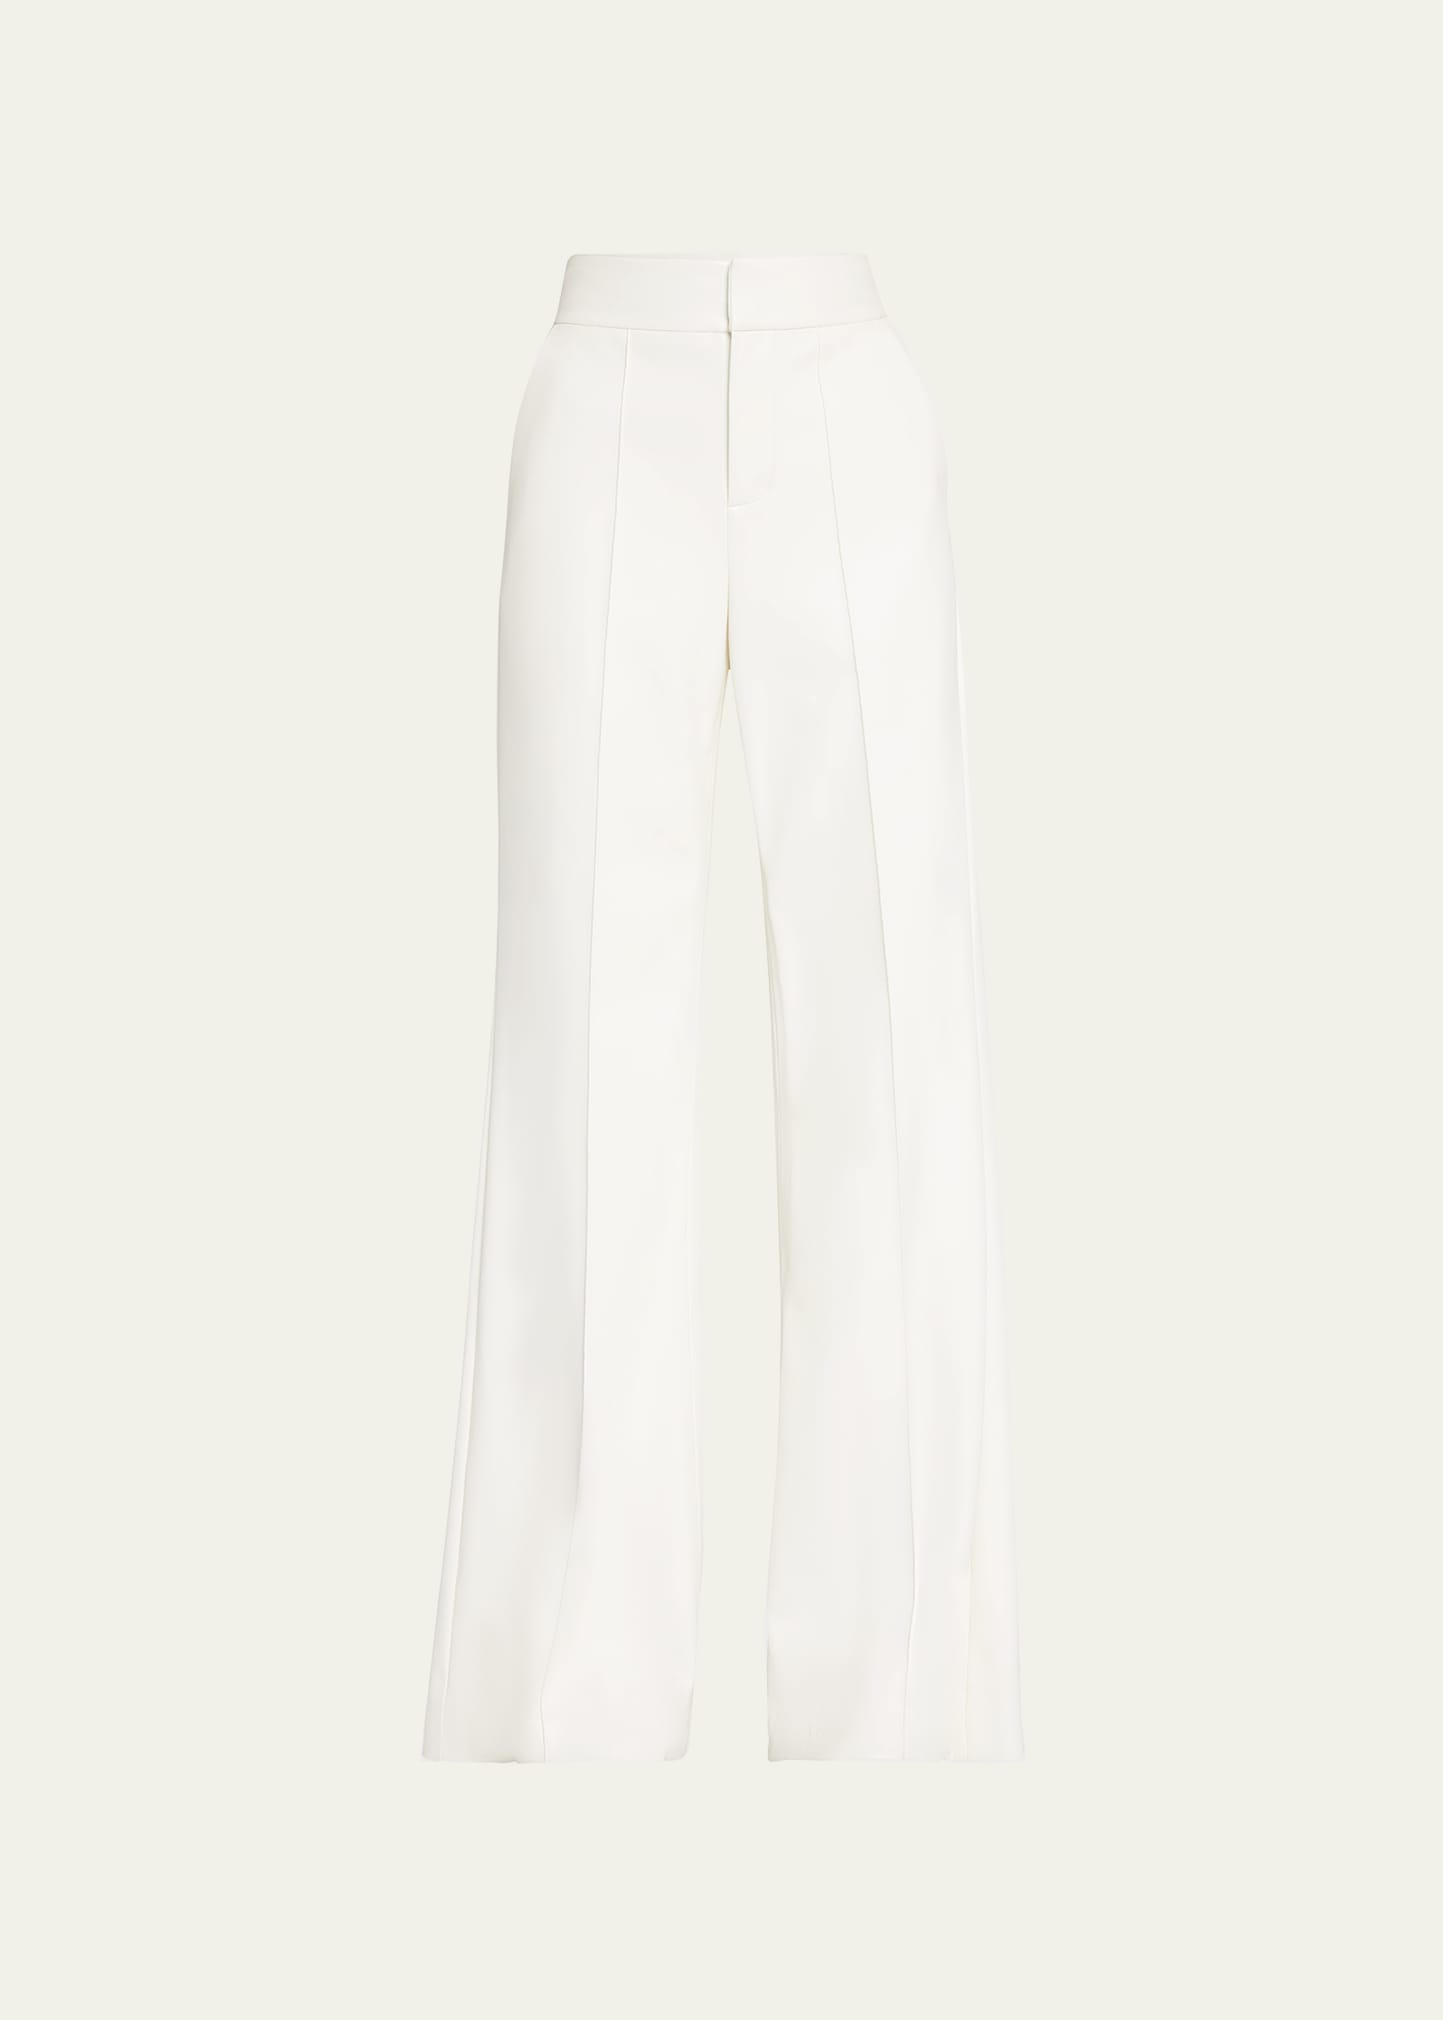 Olivia Bootcut Pant In White